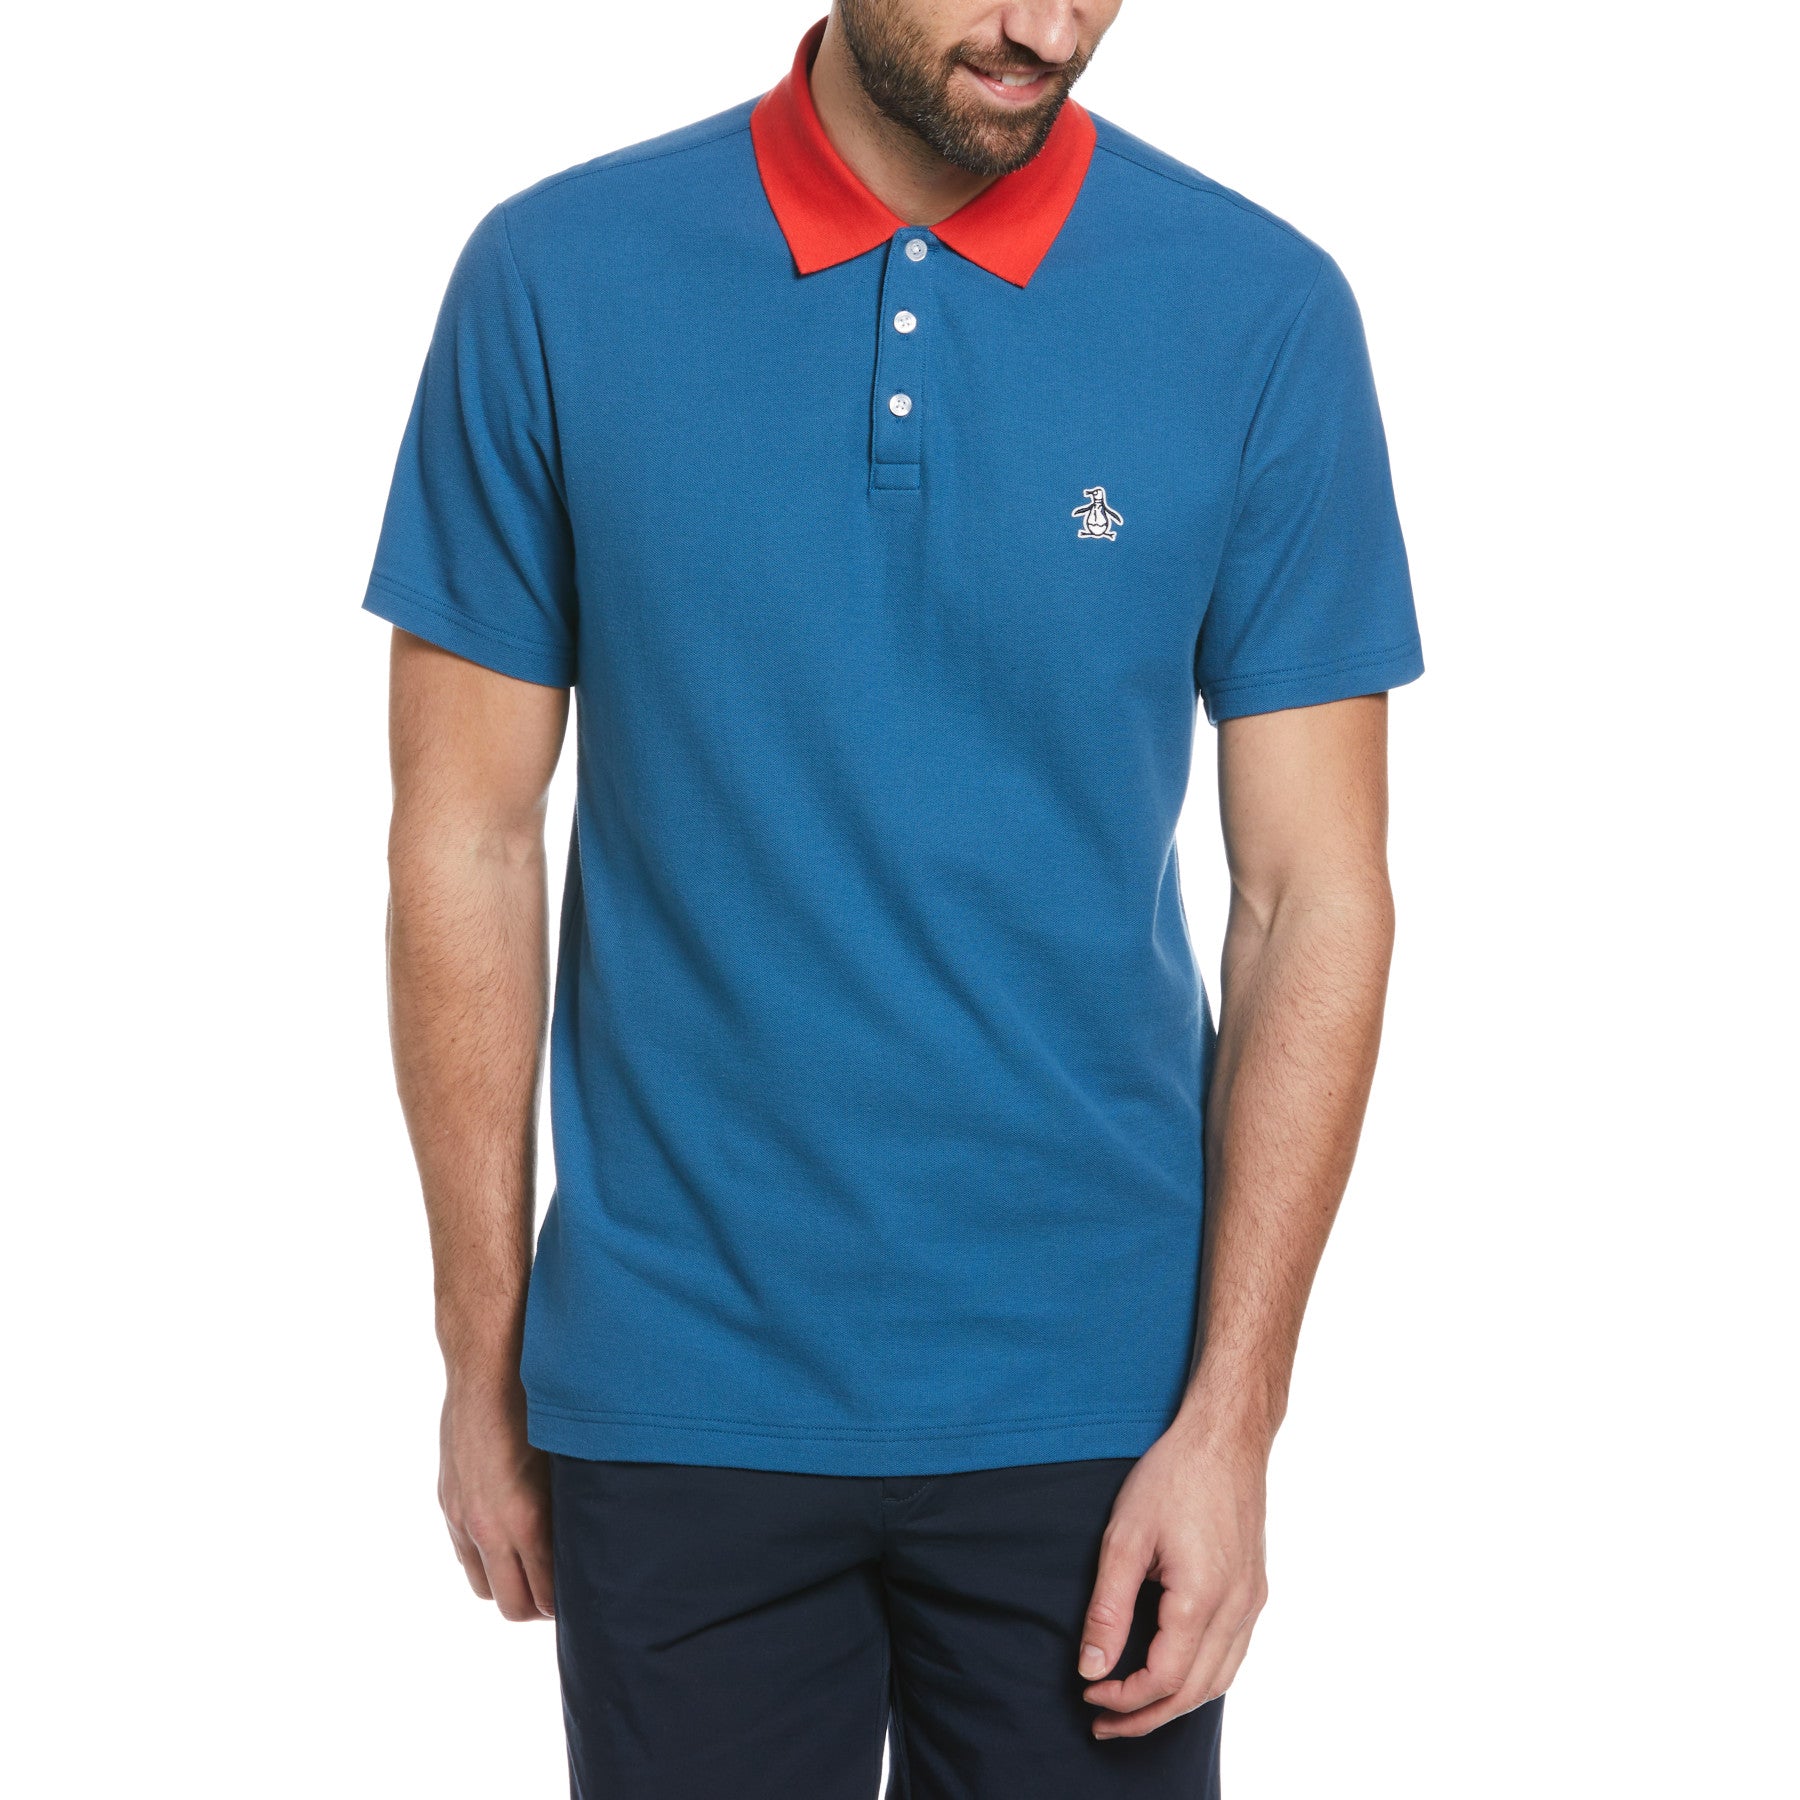 View Contrast Collar Polo Shirt In Dark Blue information